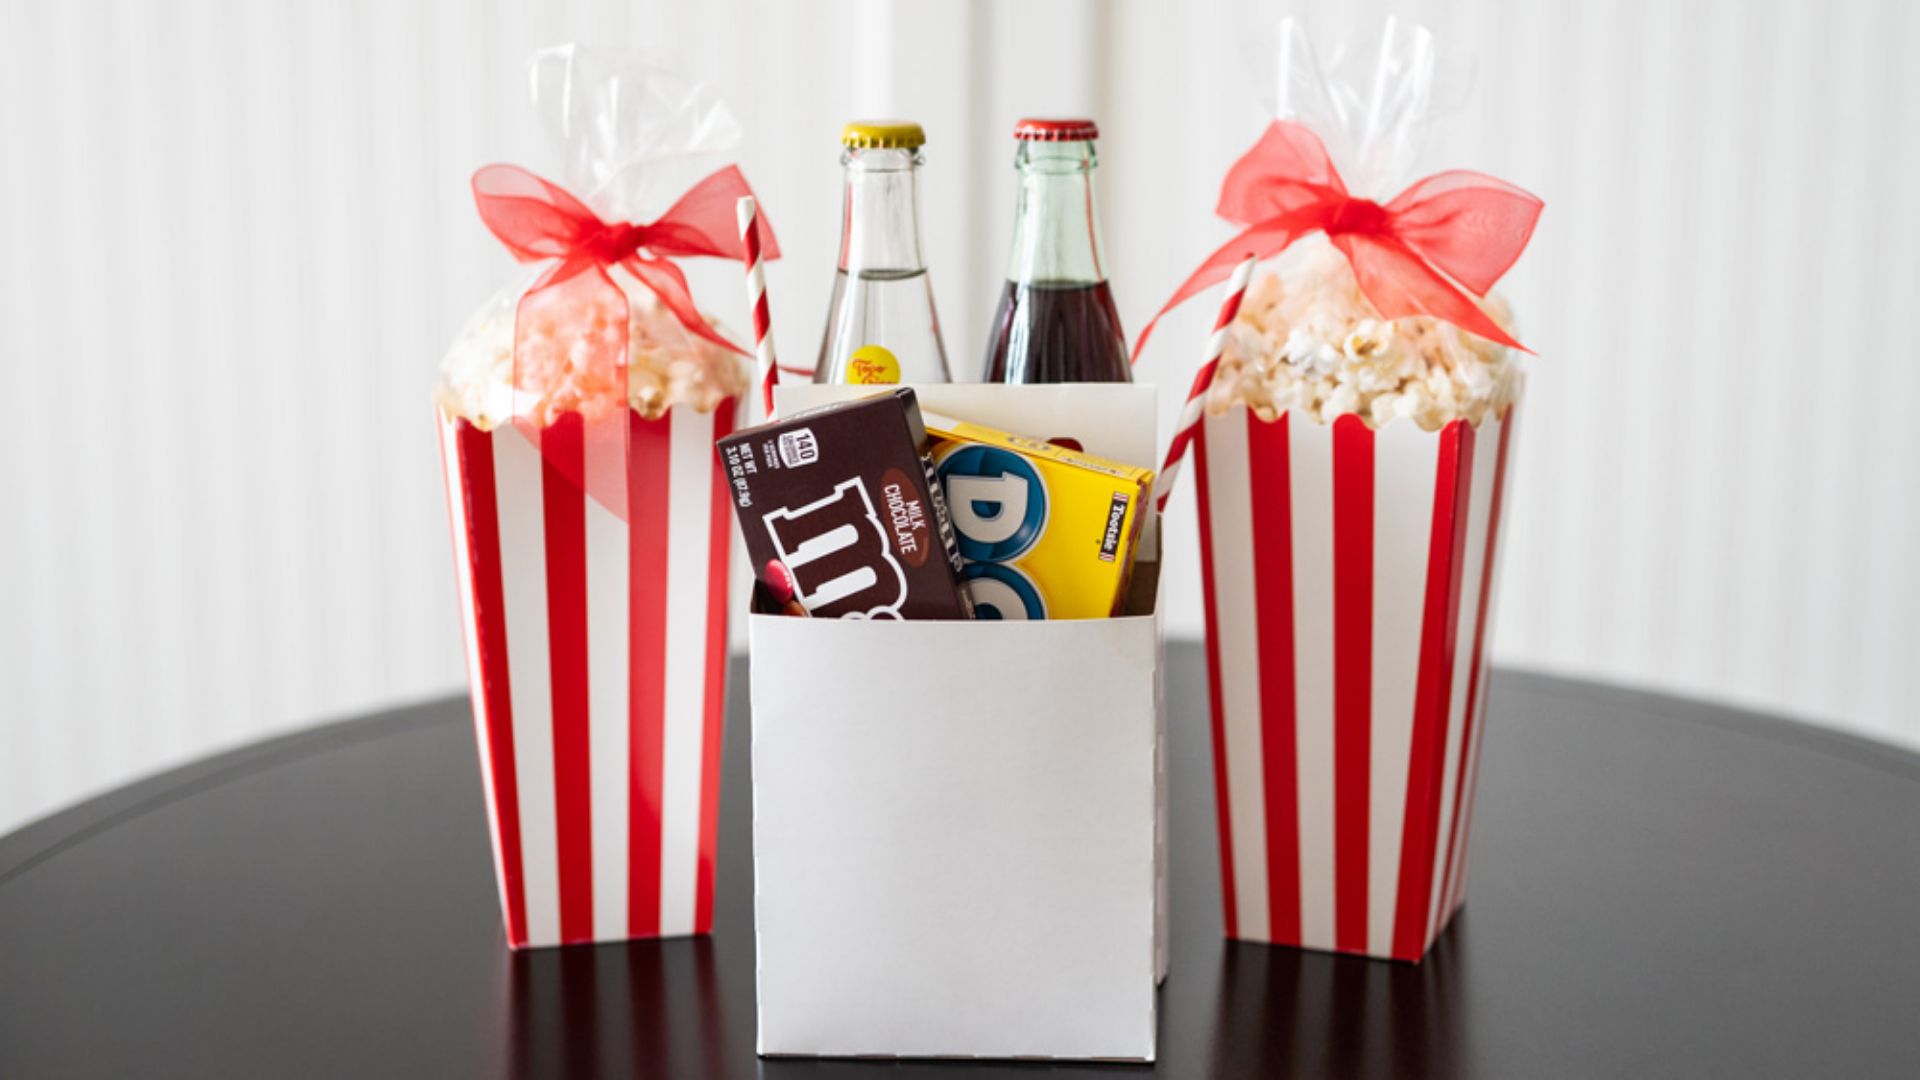 Popcorn, soda, and candy